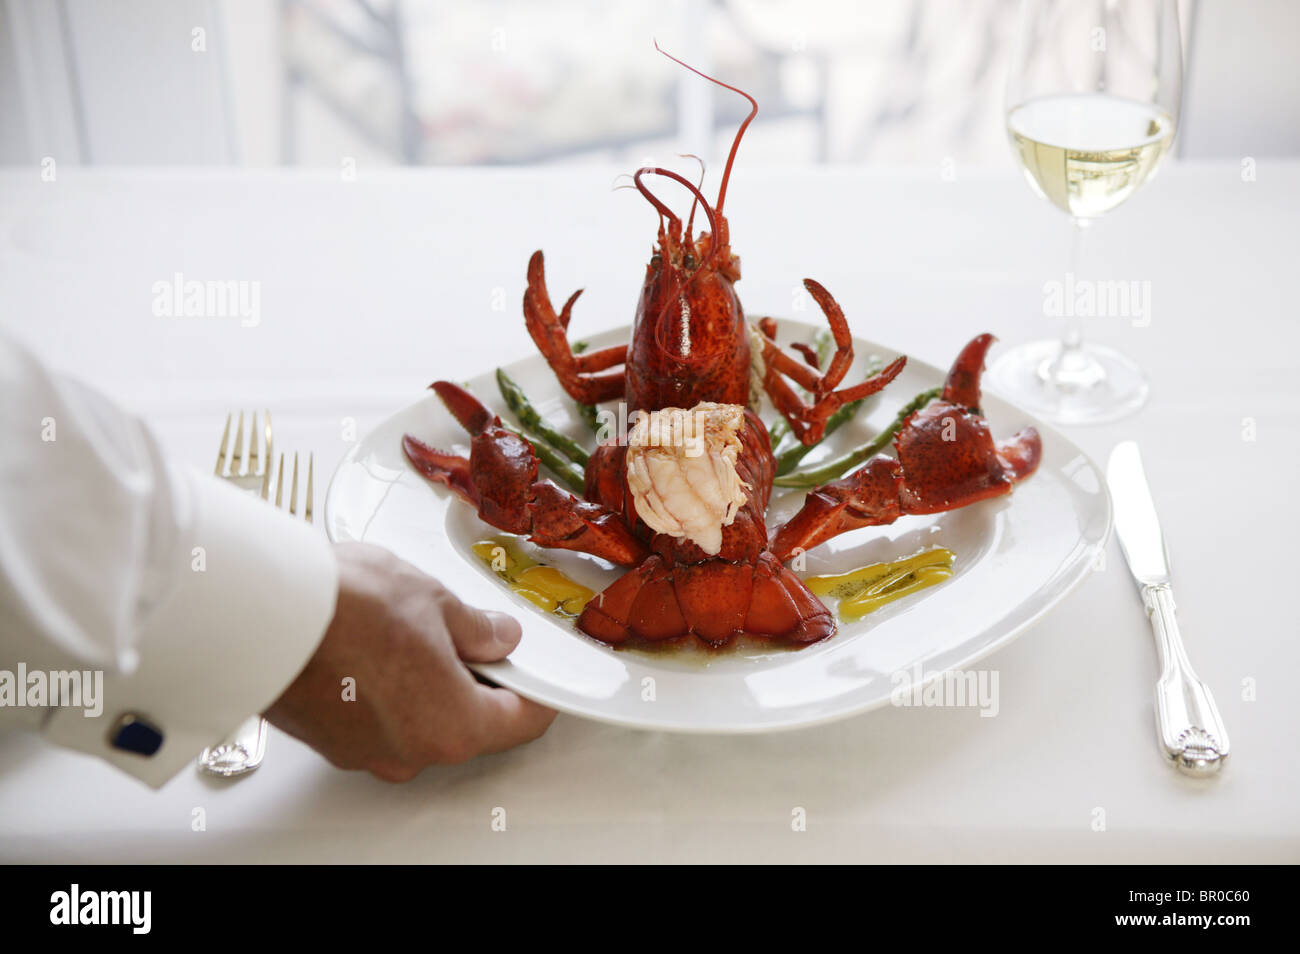 Waiter serving a lobster dinner at an upscale restaurant. Stock Photo